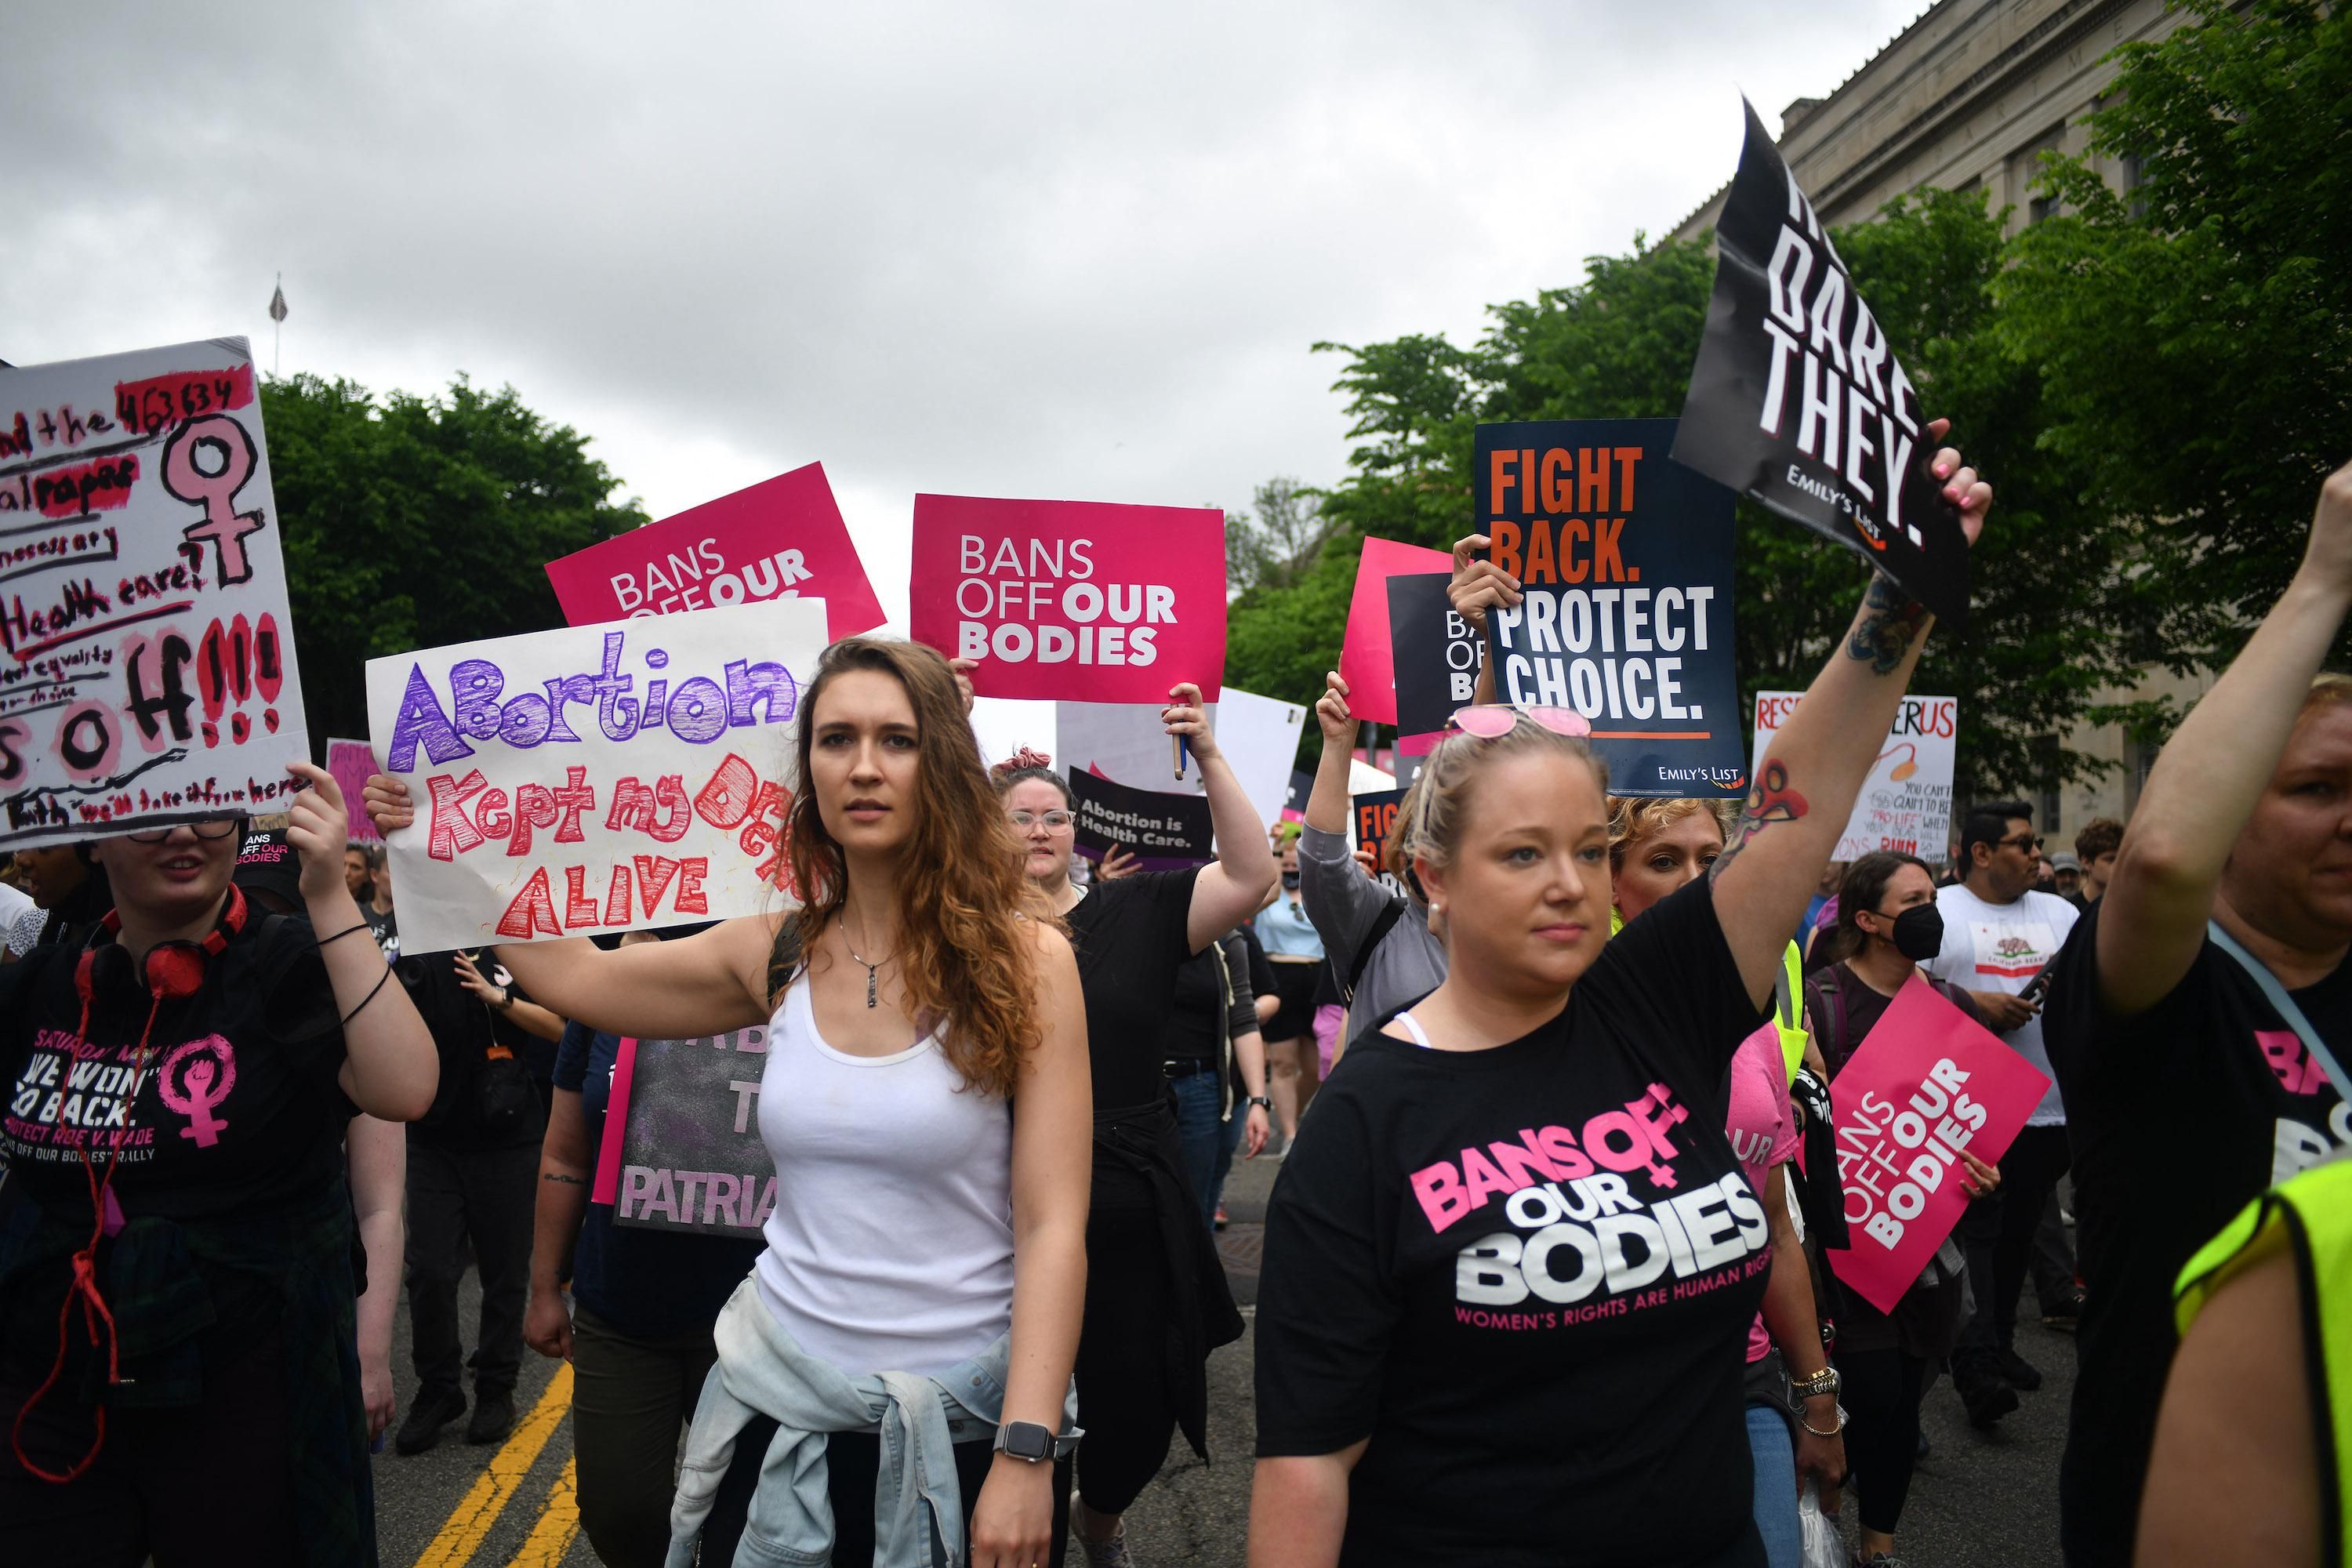 Pro-choice activists march along Constitution Avenue to the U.S. Supreme Court in Washington, D.C., May 14, 2022, to declare, 'Bans off our bodies." (Photo: Astrid Riecken for The Washington Post via Getty Images)